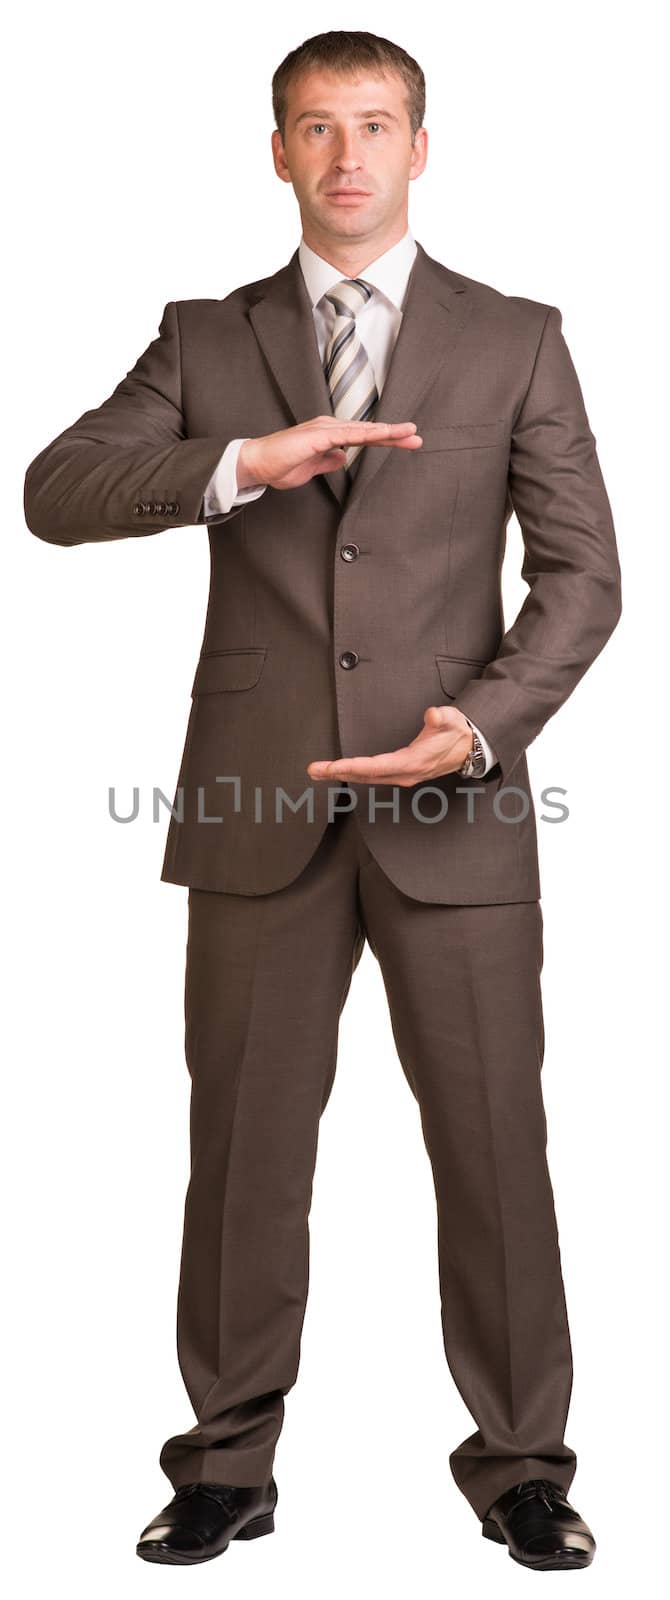 Businessman holding hands in front of him. Isolated on white background.